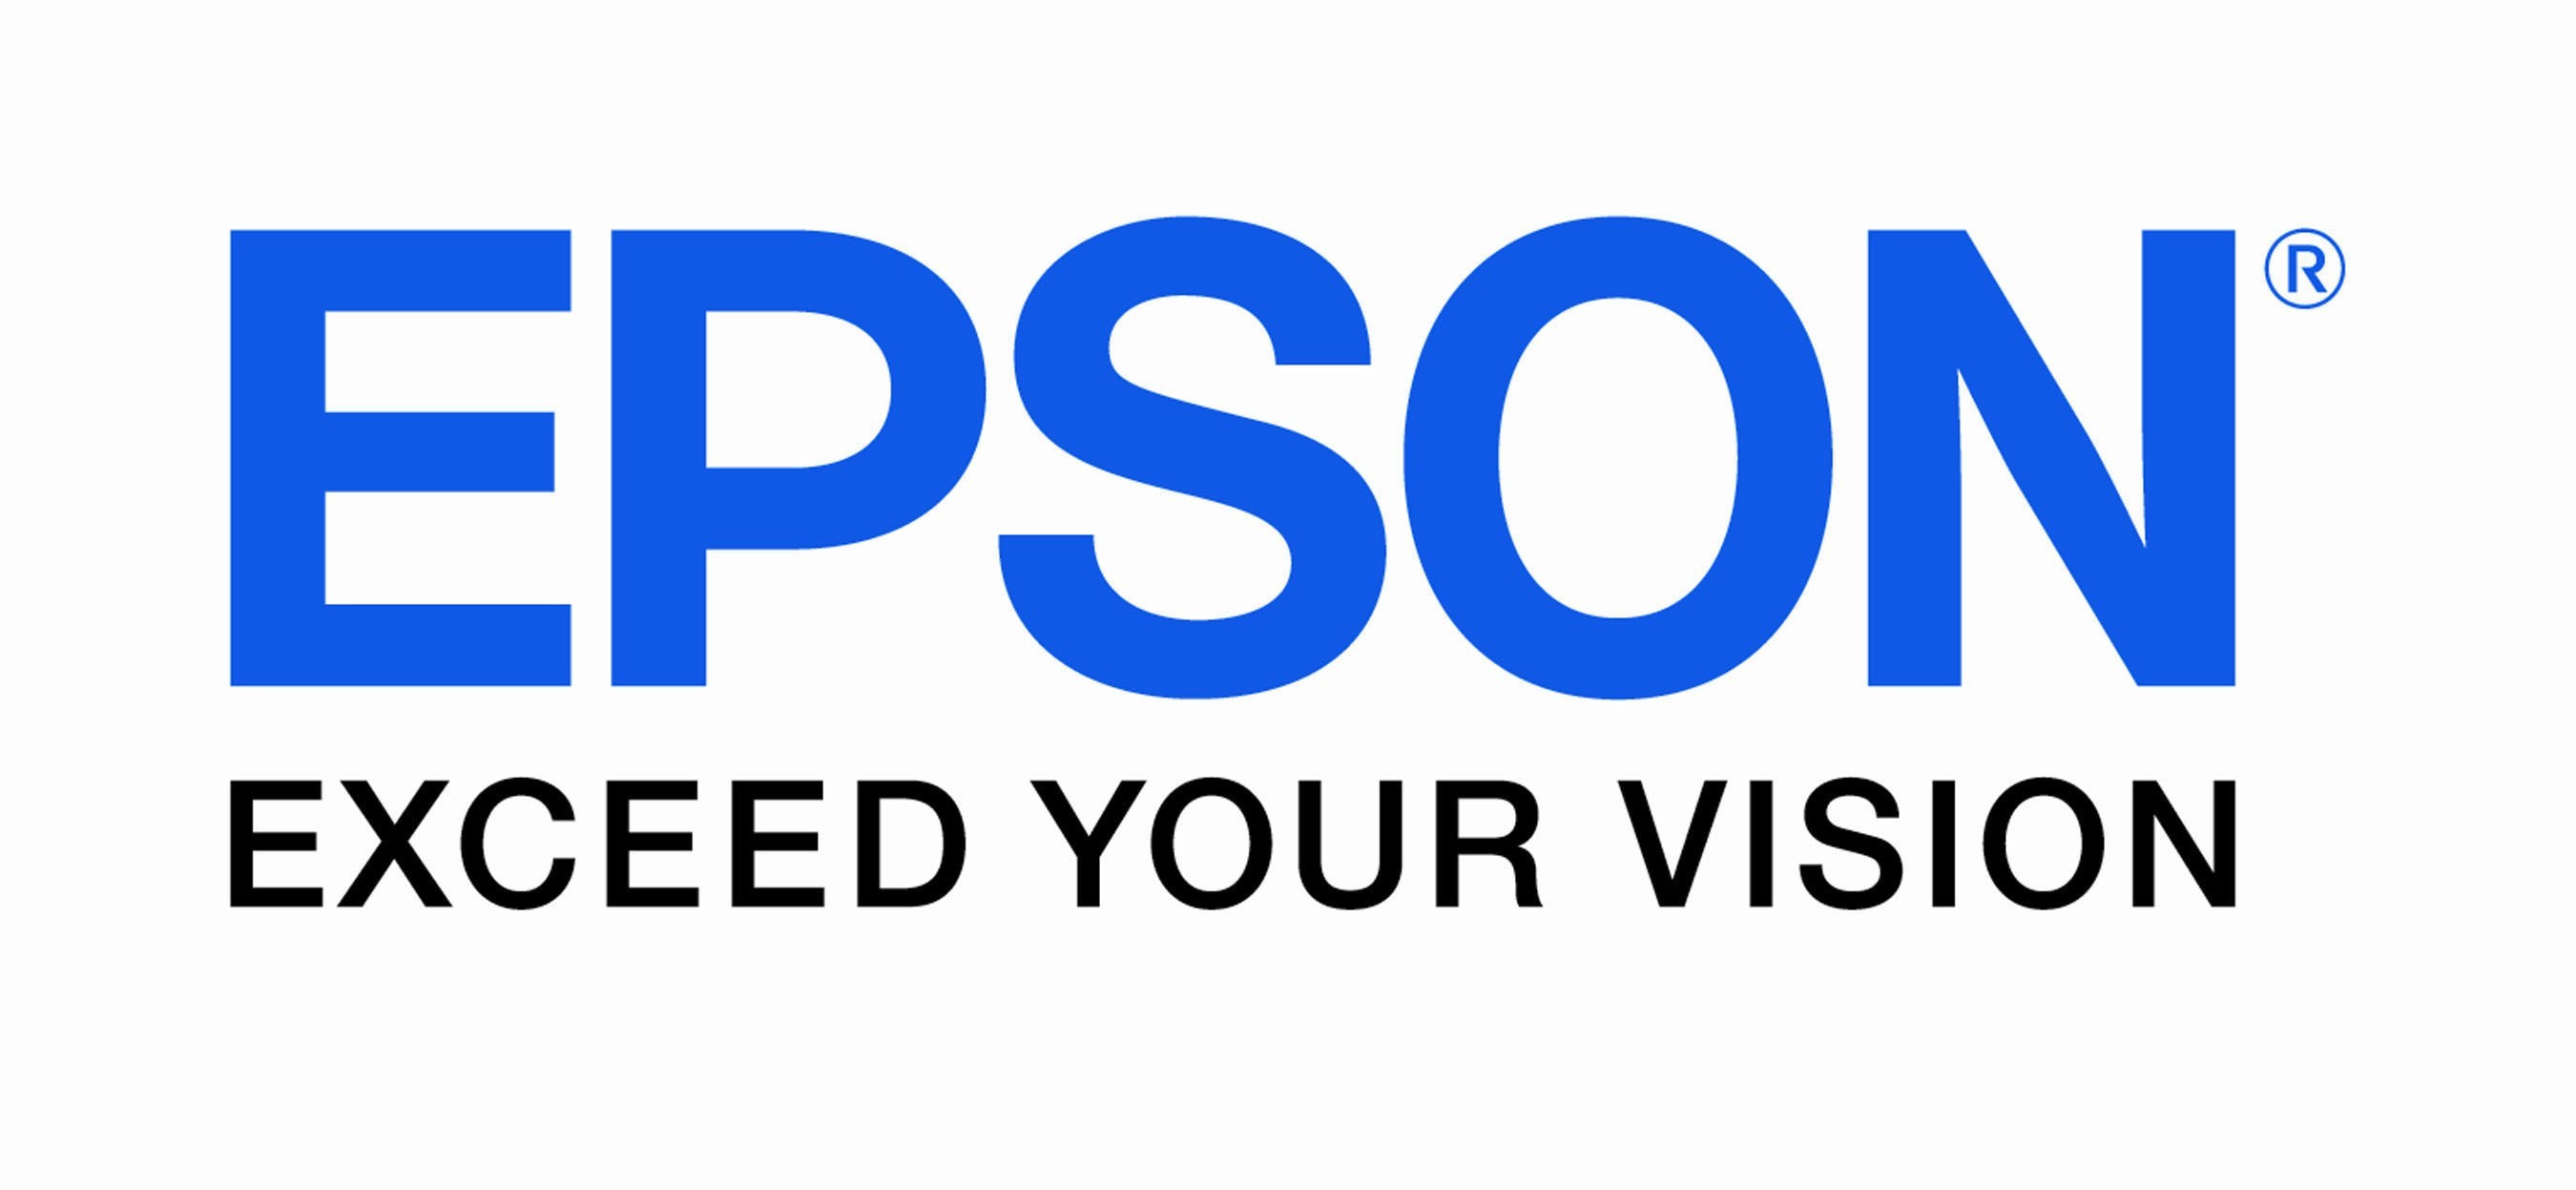 Epson Introduces Certified ReNew Program Offering Epson Technology to Consumers at a Great Value